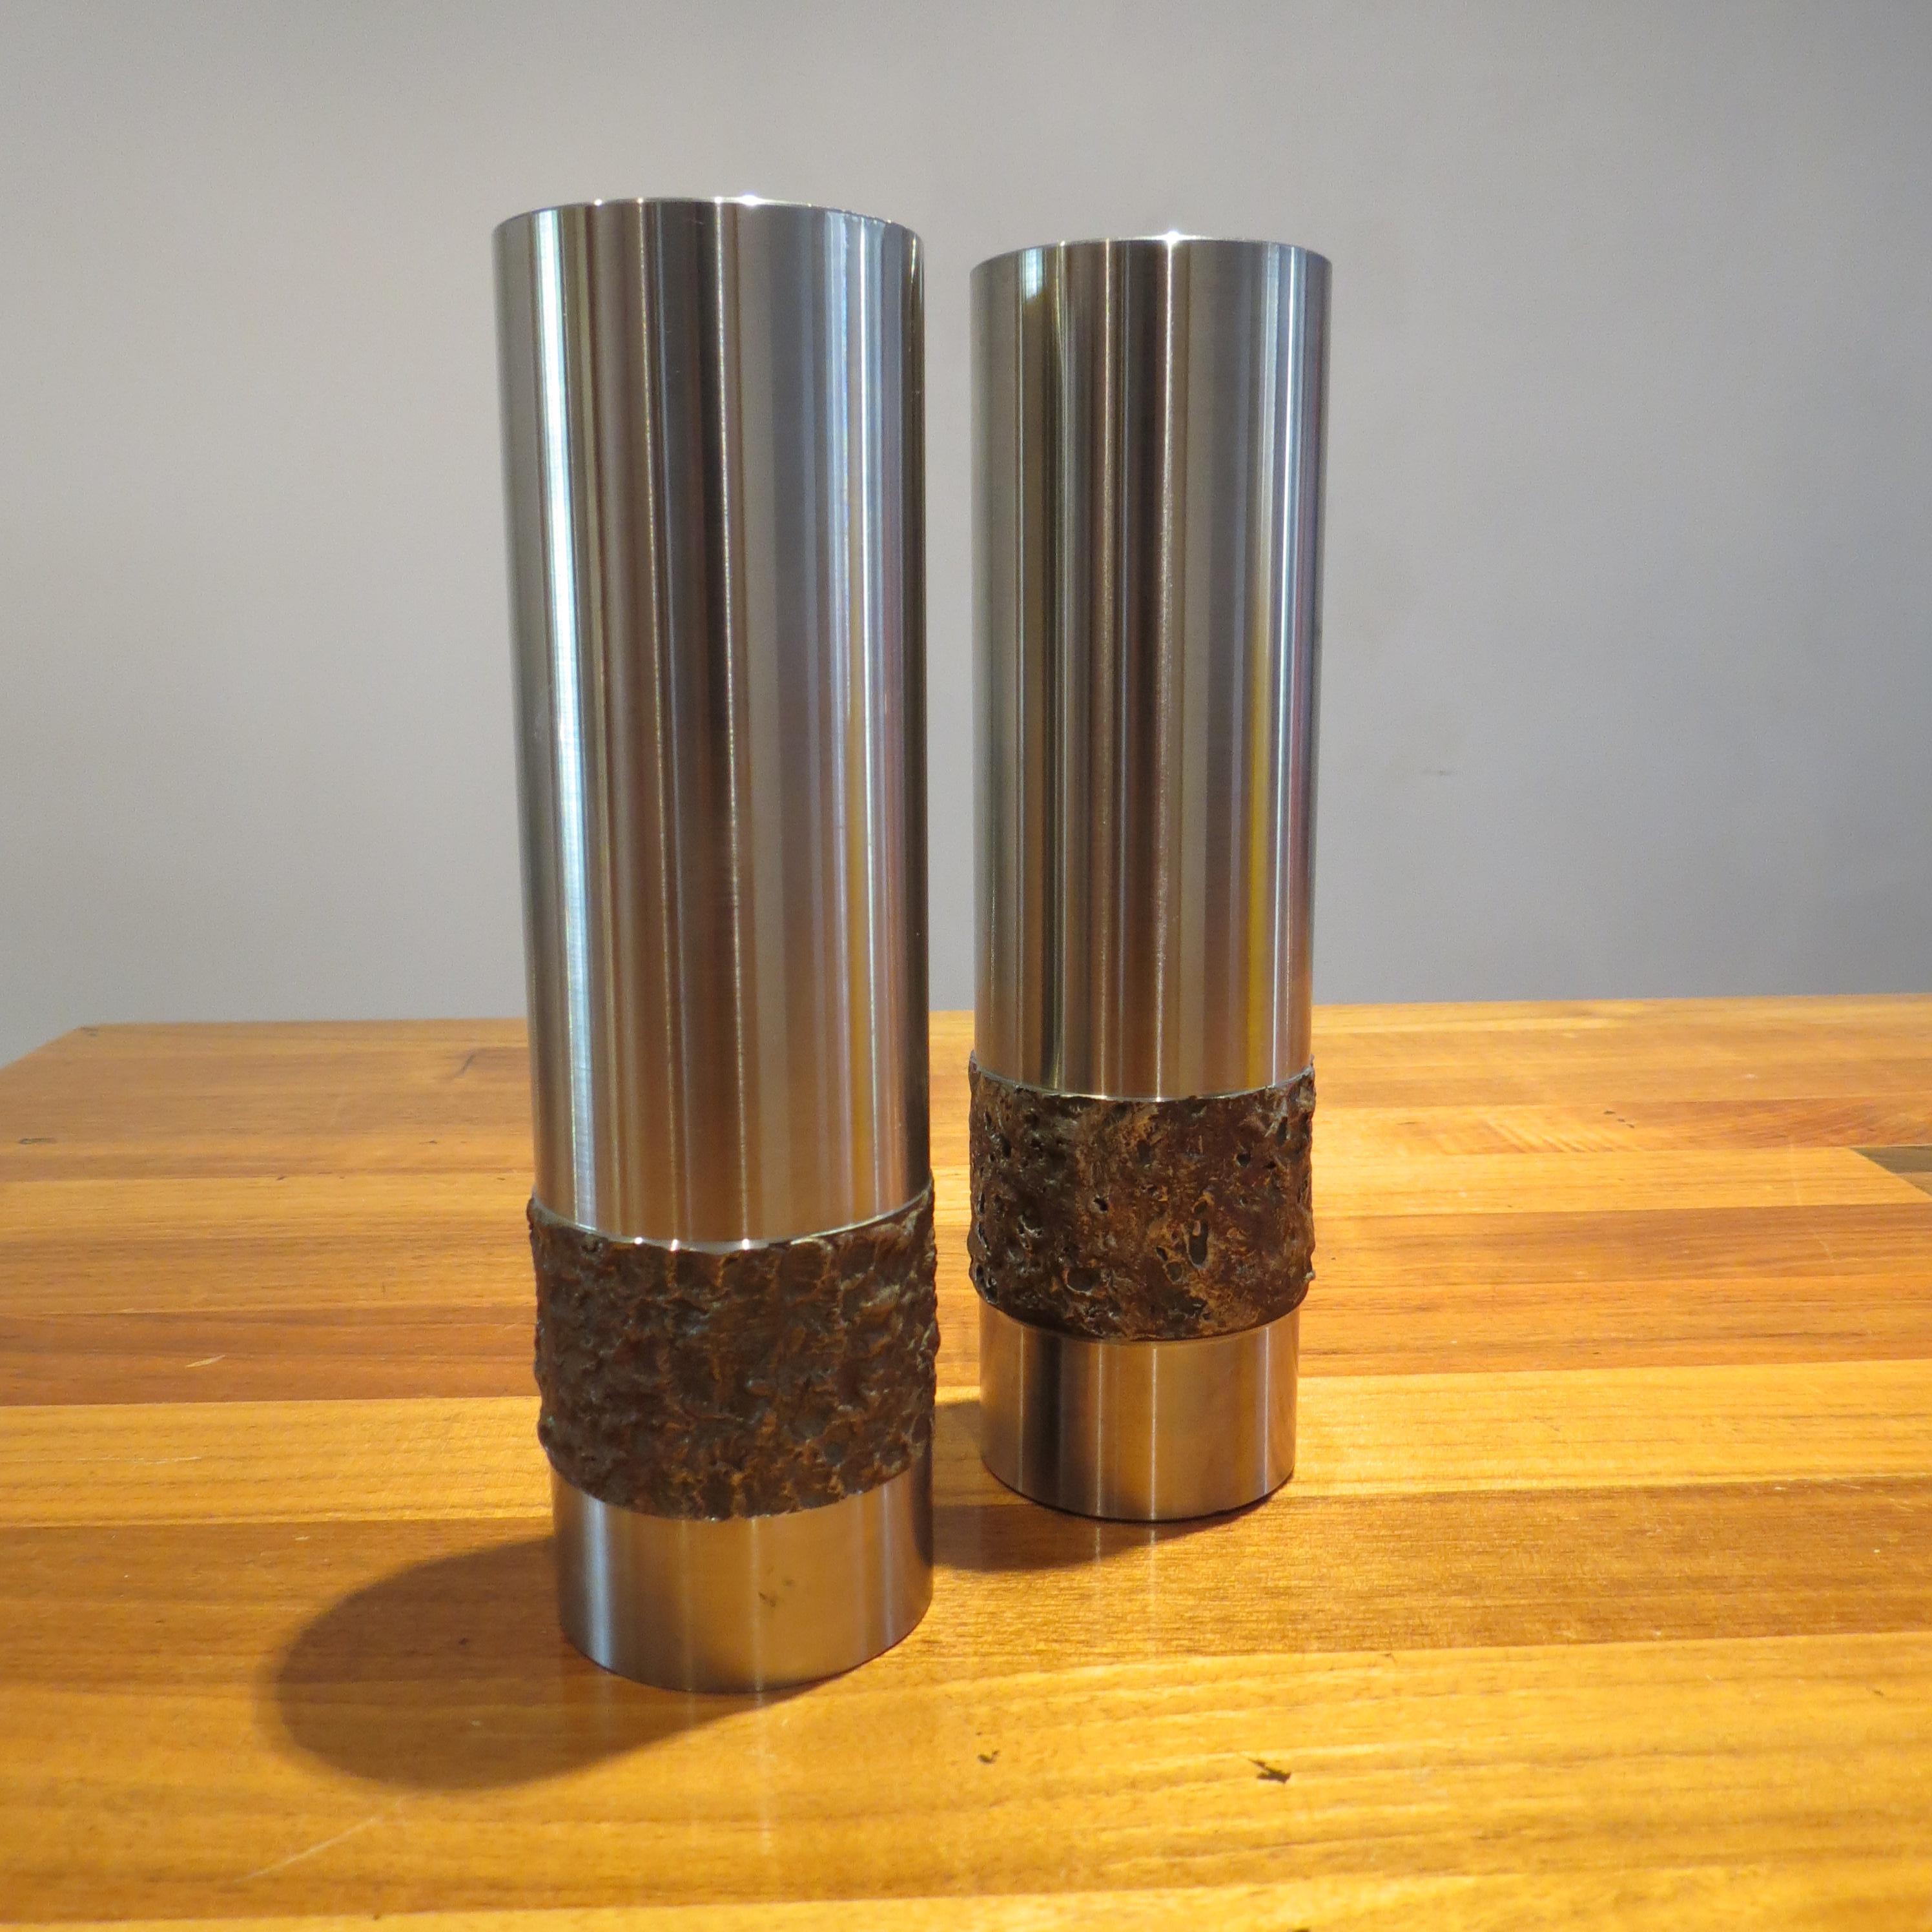 Pair of stainless steel vases in Brutalist form from the 1970s. 
Hand produced in Germany, turned stainless steel with decorative pattern. Very heavy good quality piece, could also be used as candleholders. 
 

The each measure 20.5cm x 6cm